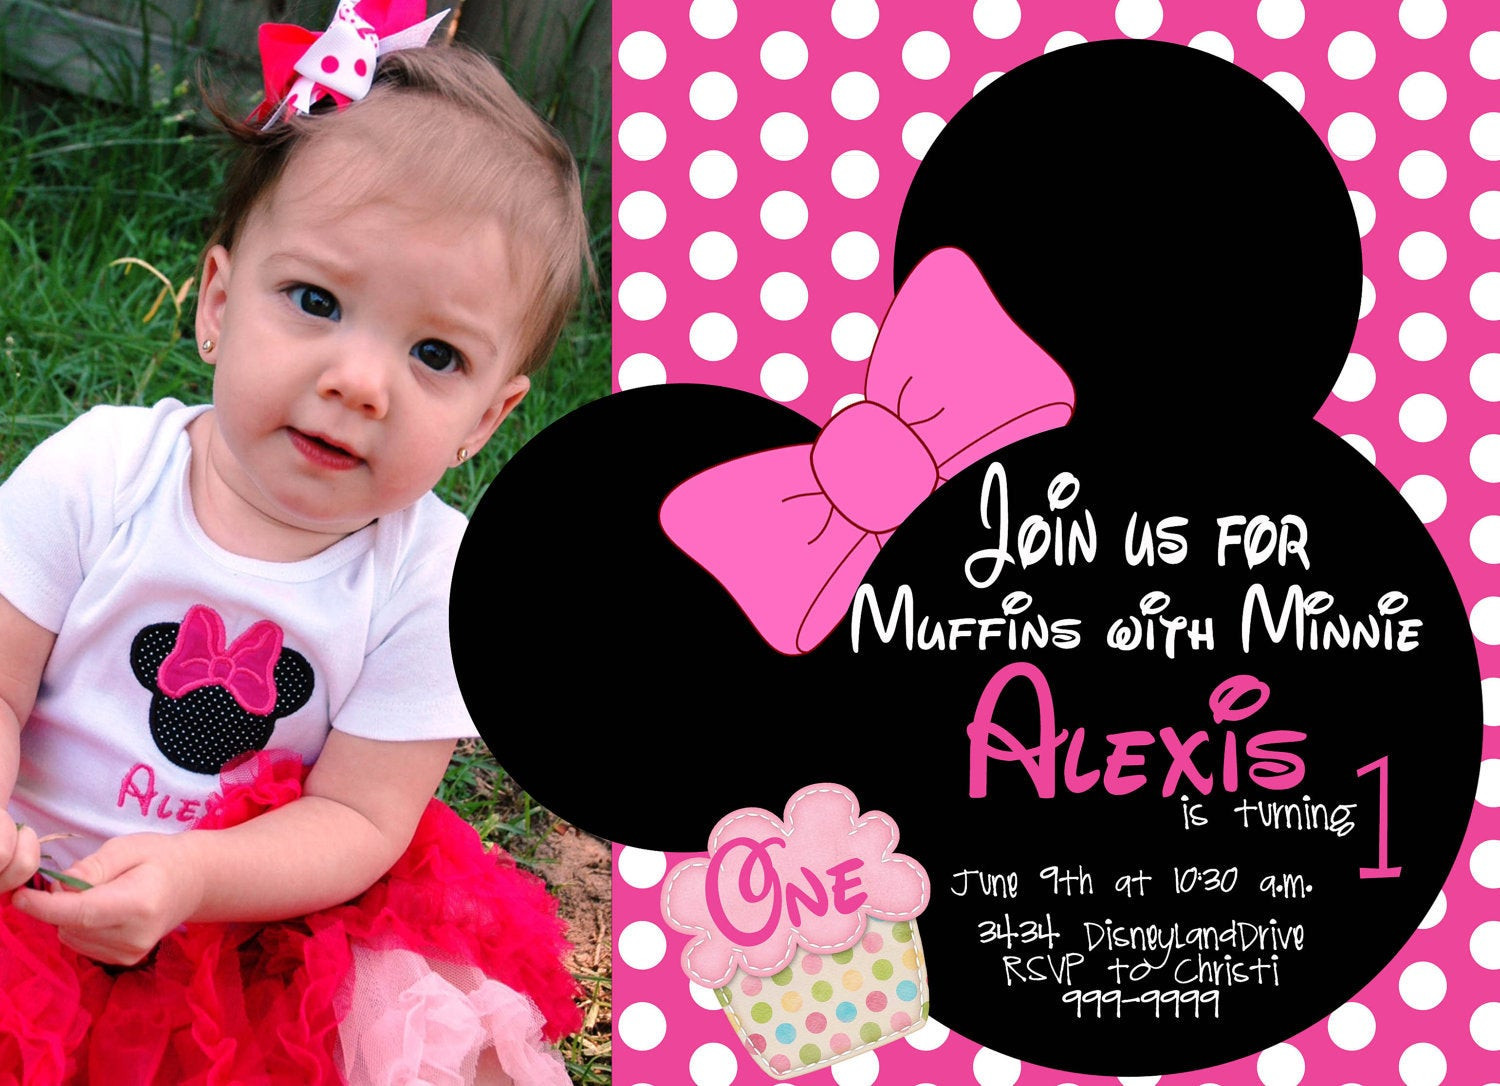 Minnie Mouse Birthday Invitations Personalized
 Disney Minnie Mouse Birthday invitation by MagicbyMarcy on